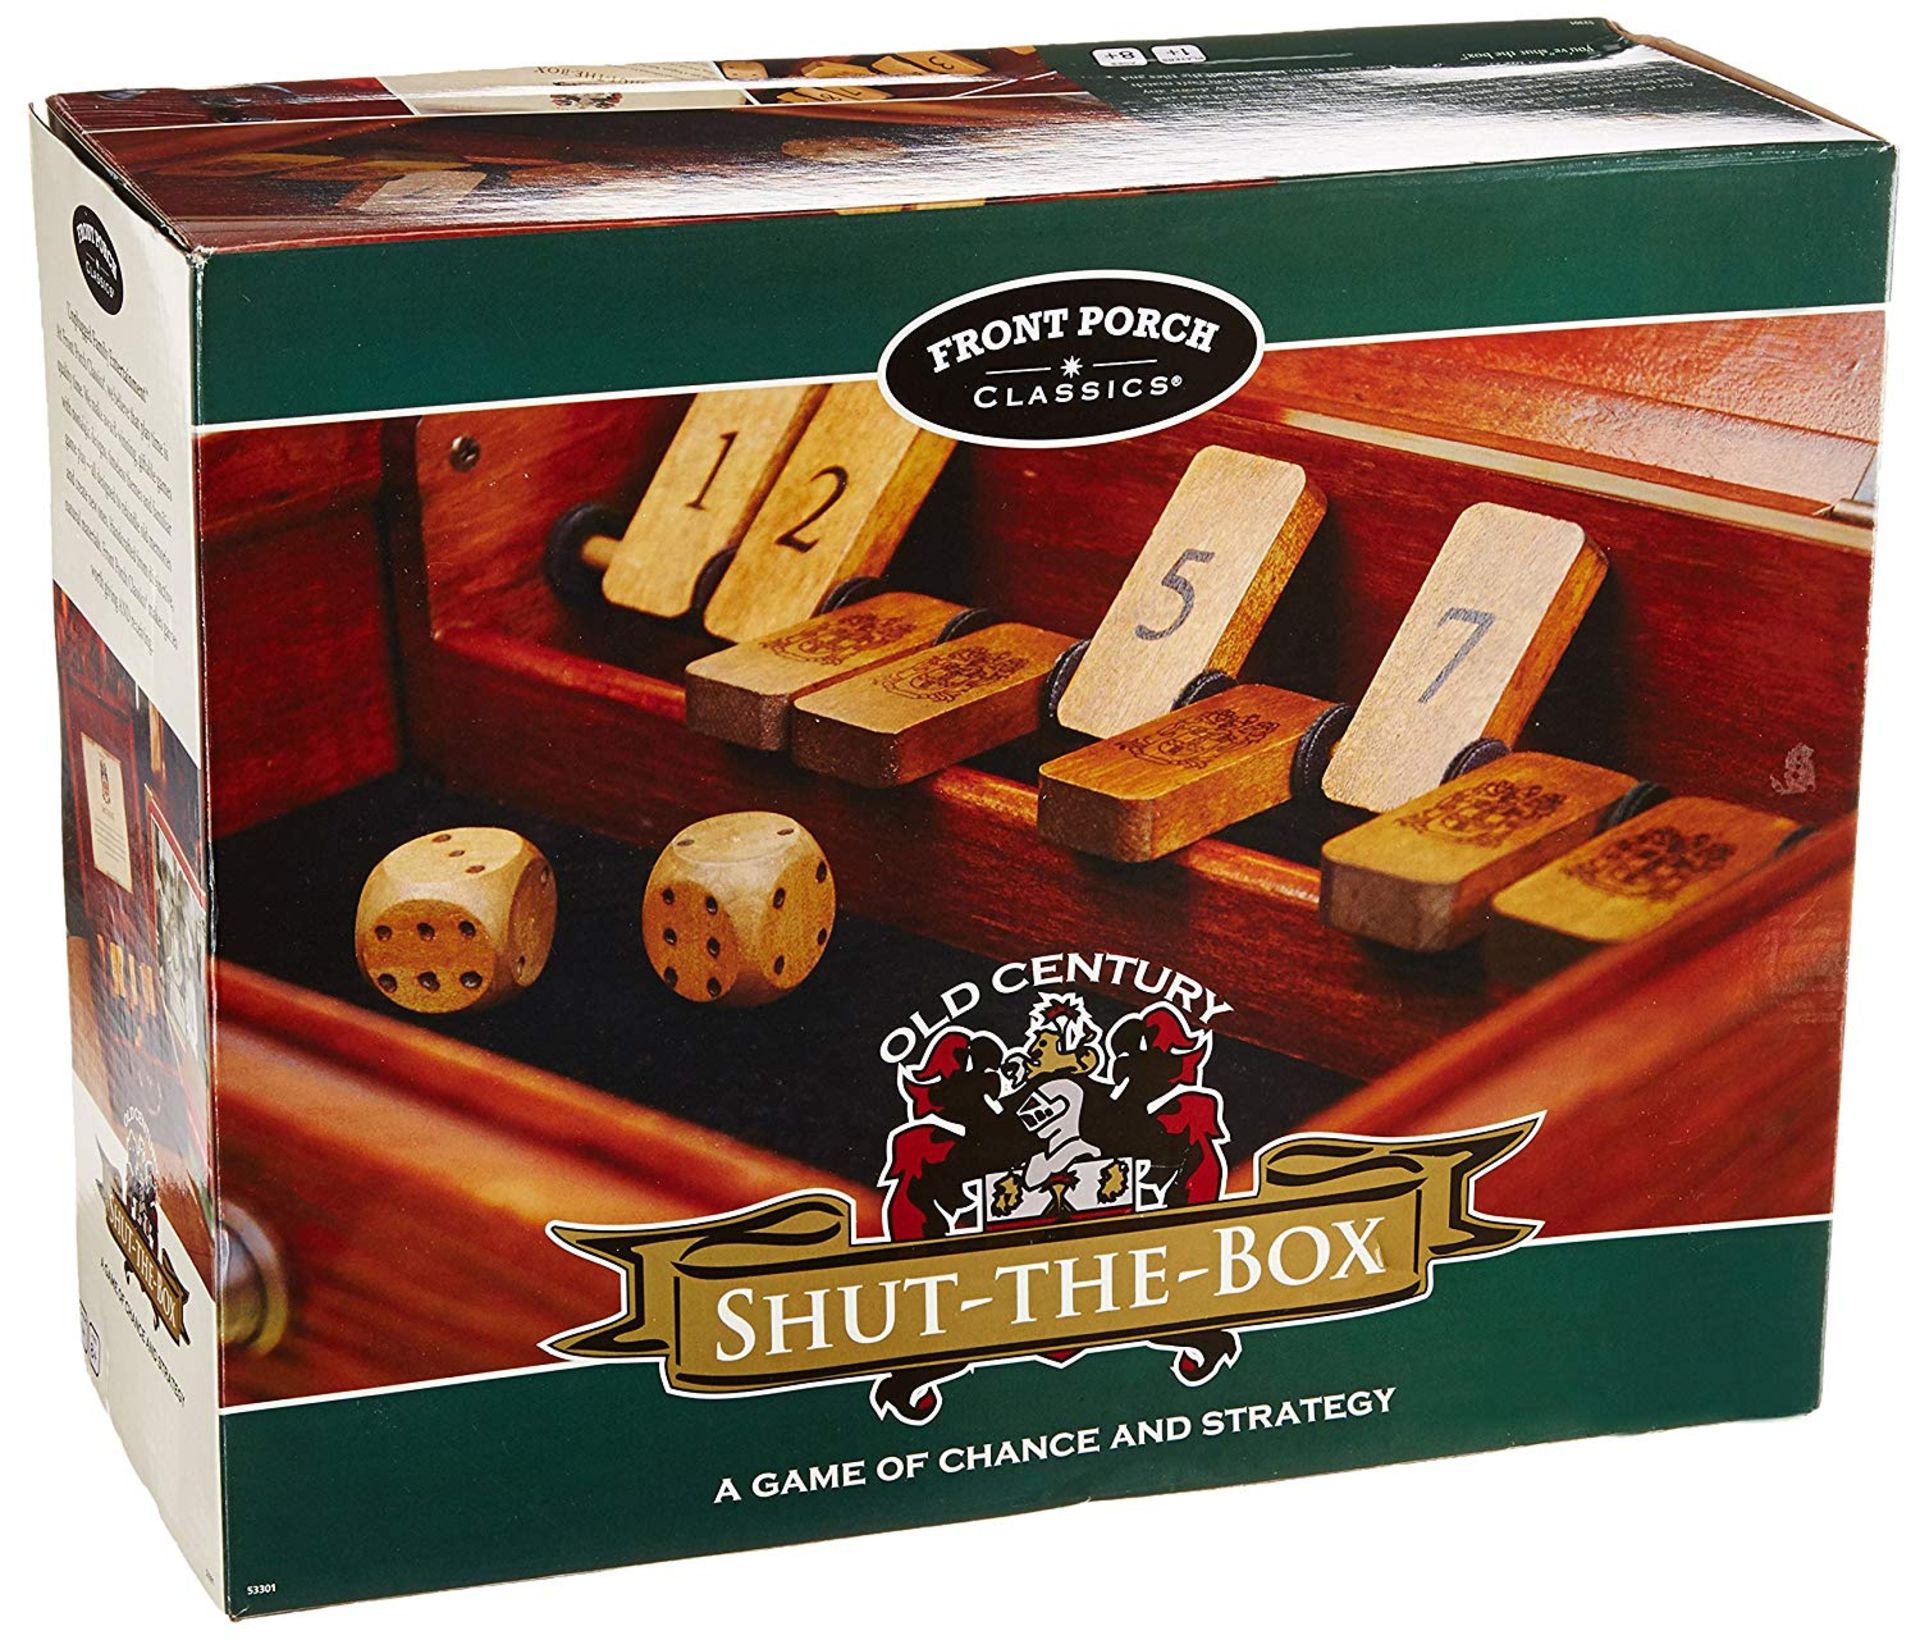 5 x Shut-The-Box Old Century Edition by Front Porch Classics | 793631104918 | RRP £230.30